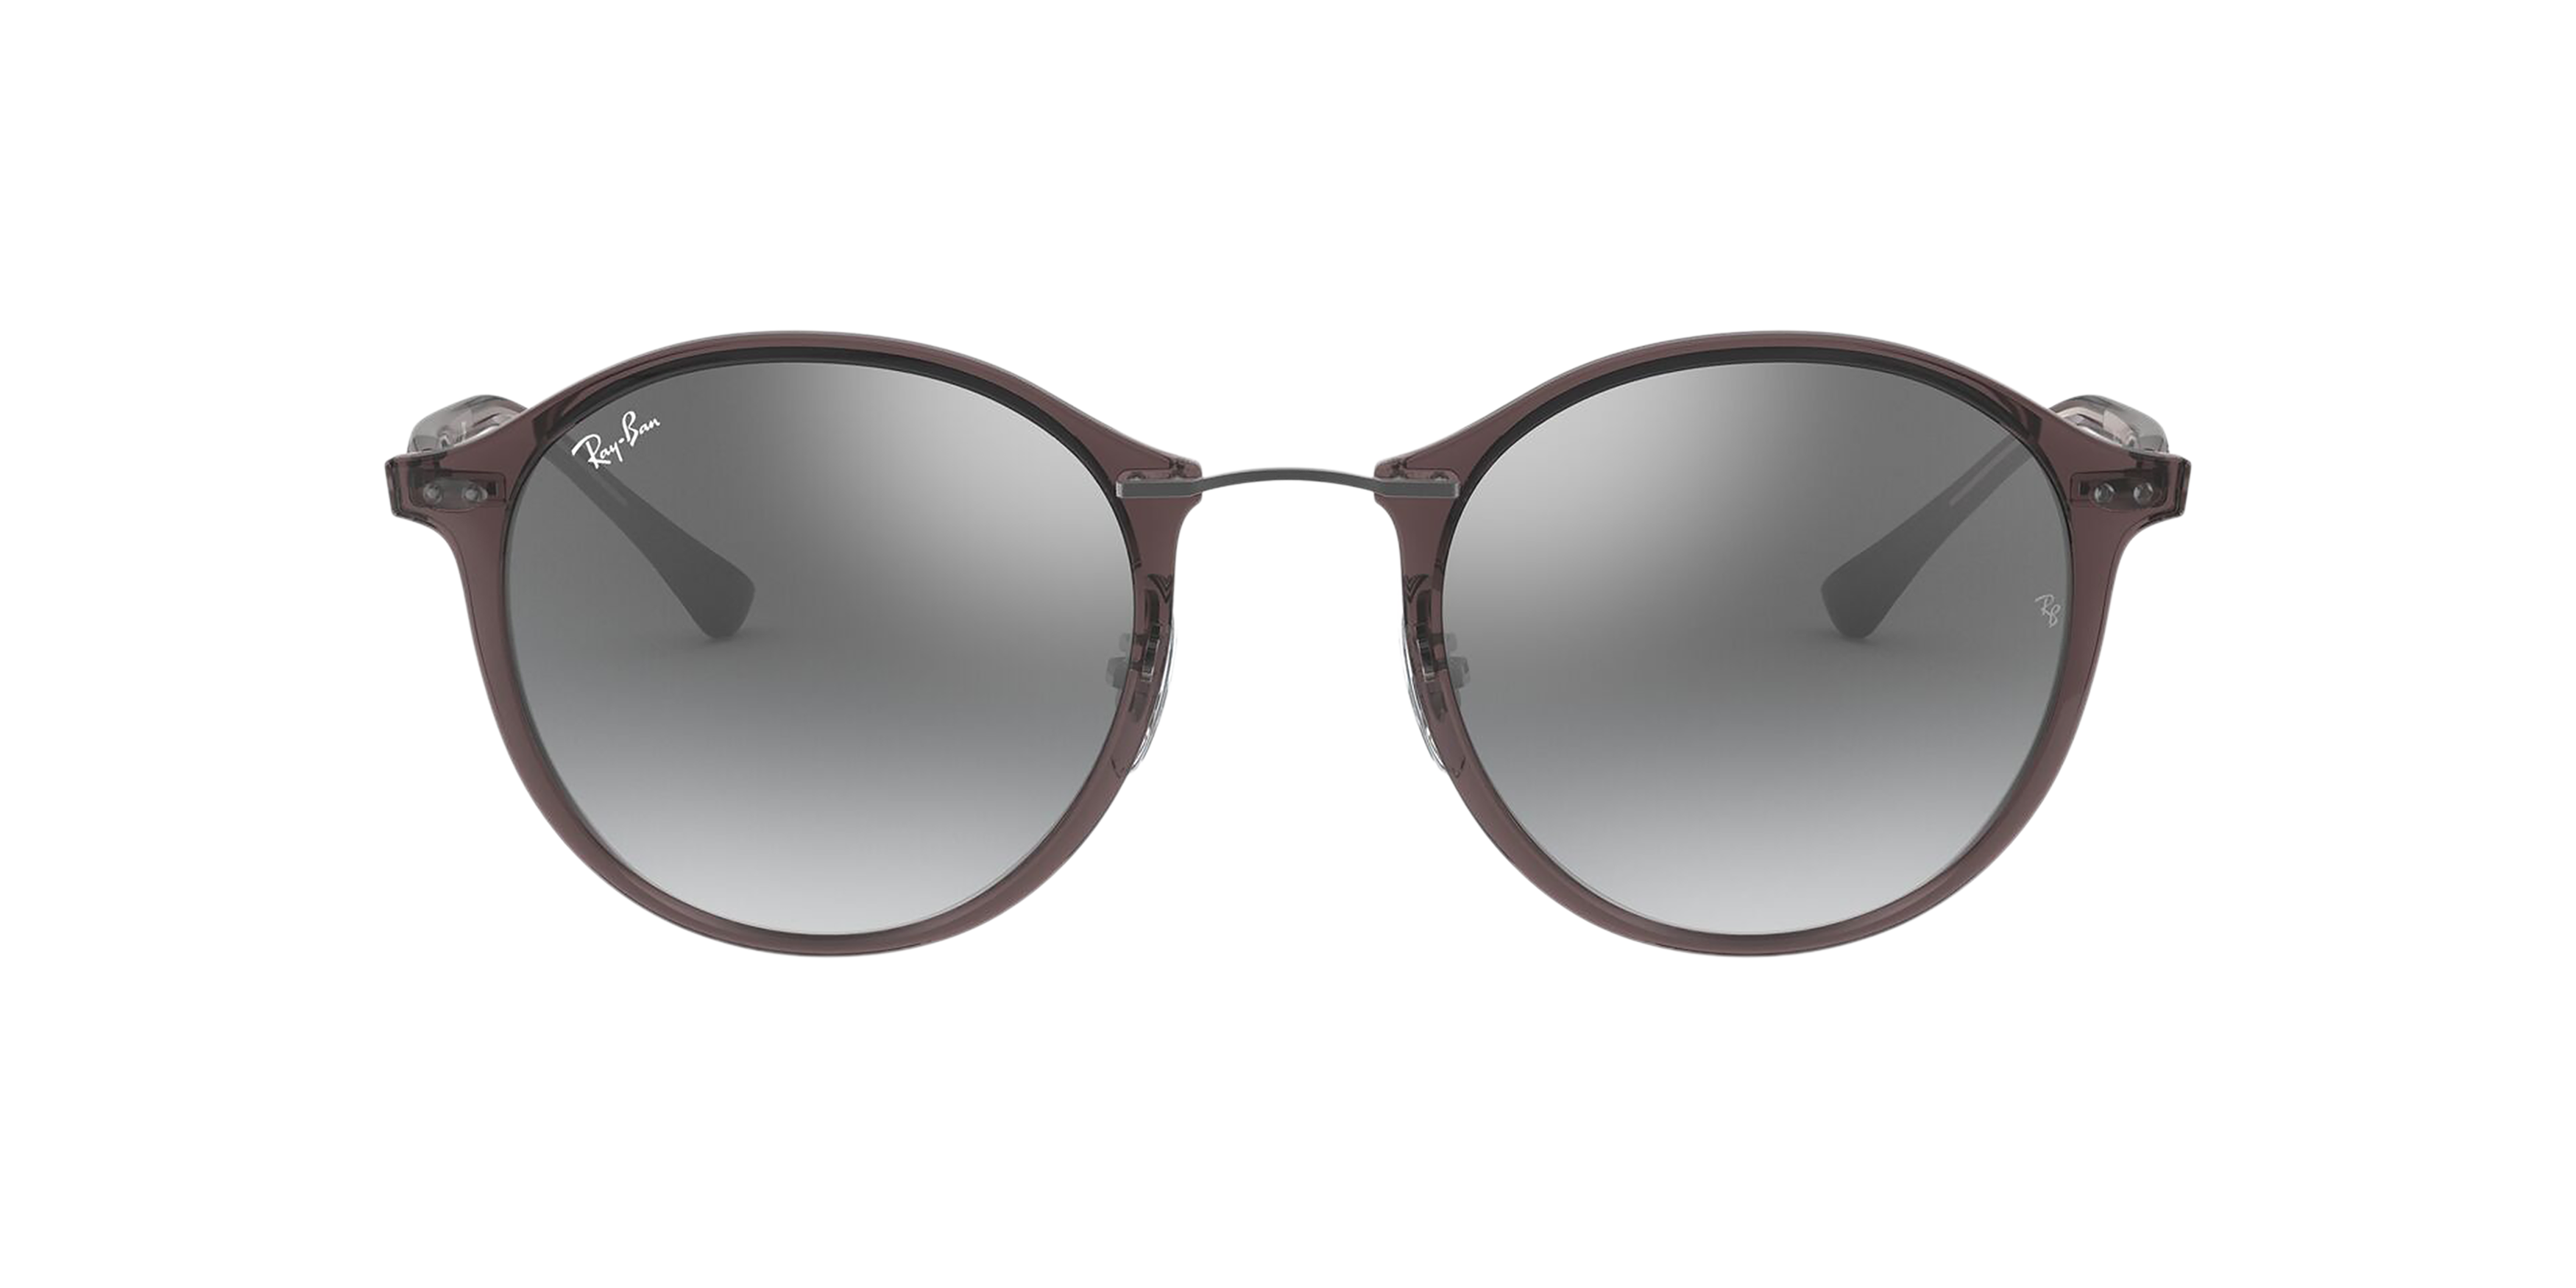 [products.image.front] Ray-Ban Round II Light Ray RB4242 620088